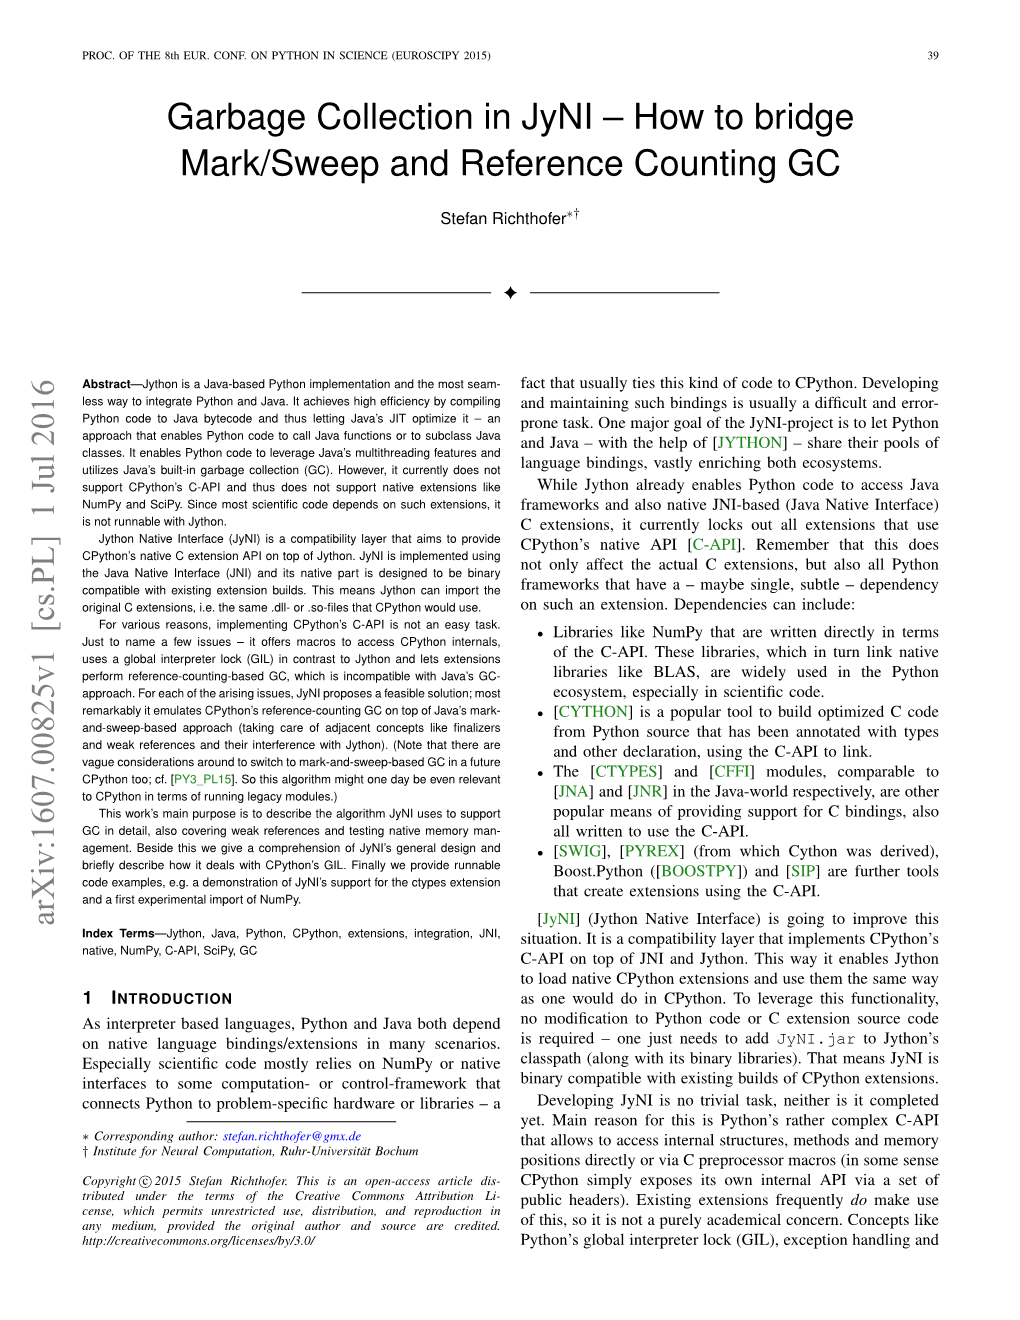 Garbage Collection in Jyni – How to Bridge Mark/Sweep and Reference Counting GC